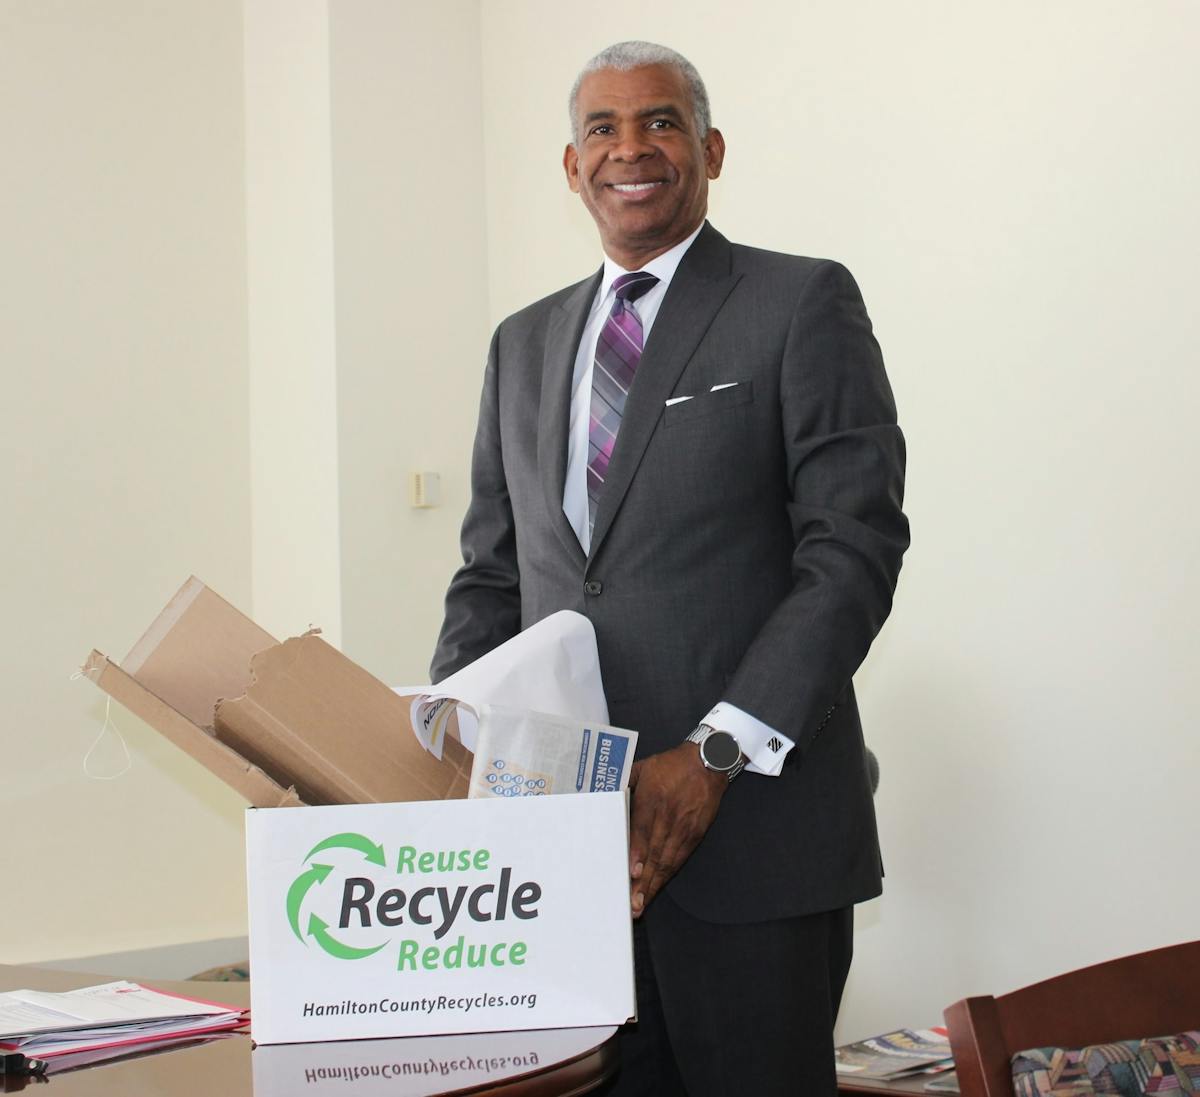 Cincinnati Metro CEO &amp; General Manager Dwight A. Ferrell proves that at Metro sustainability is a key part of its business model from the top down.